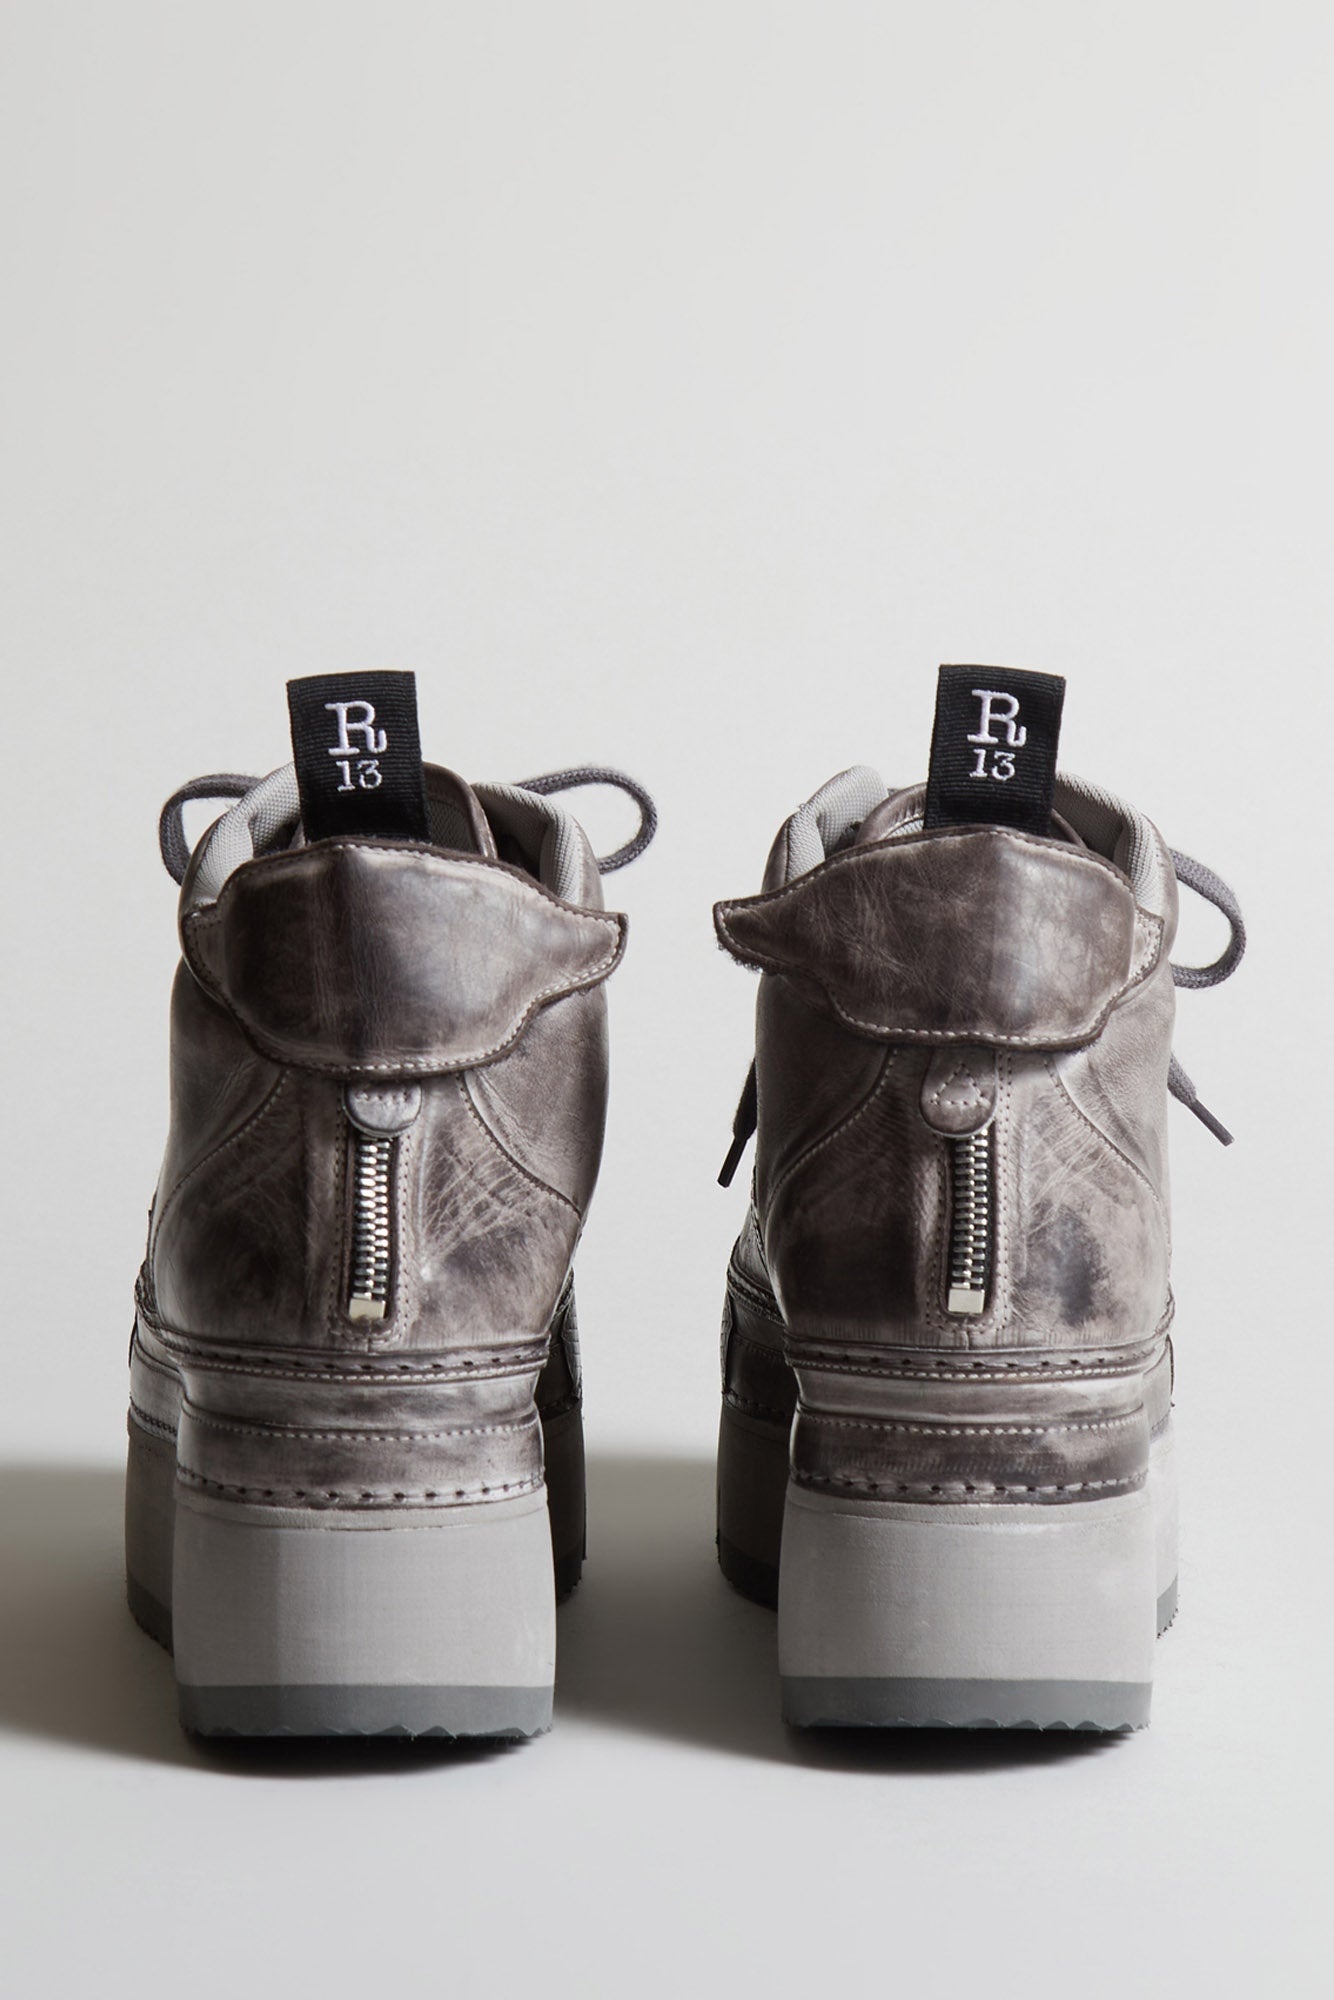 THE RIOT SNEAKER - DISTRESSED GREY LEATHER - 3